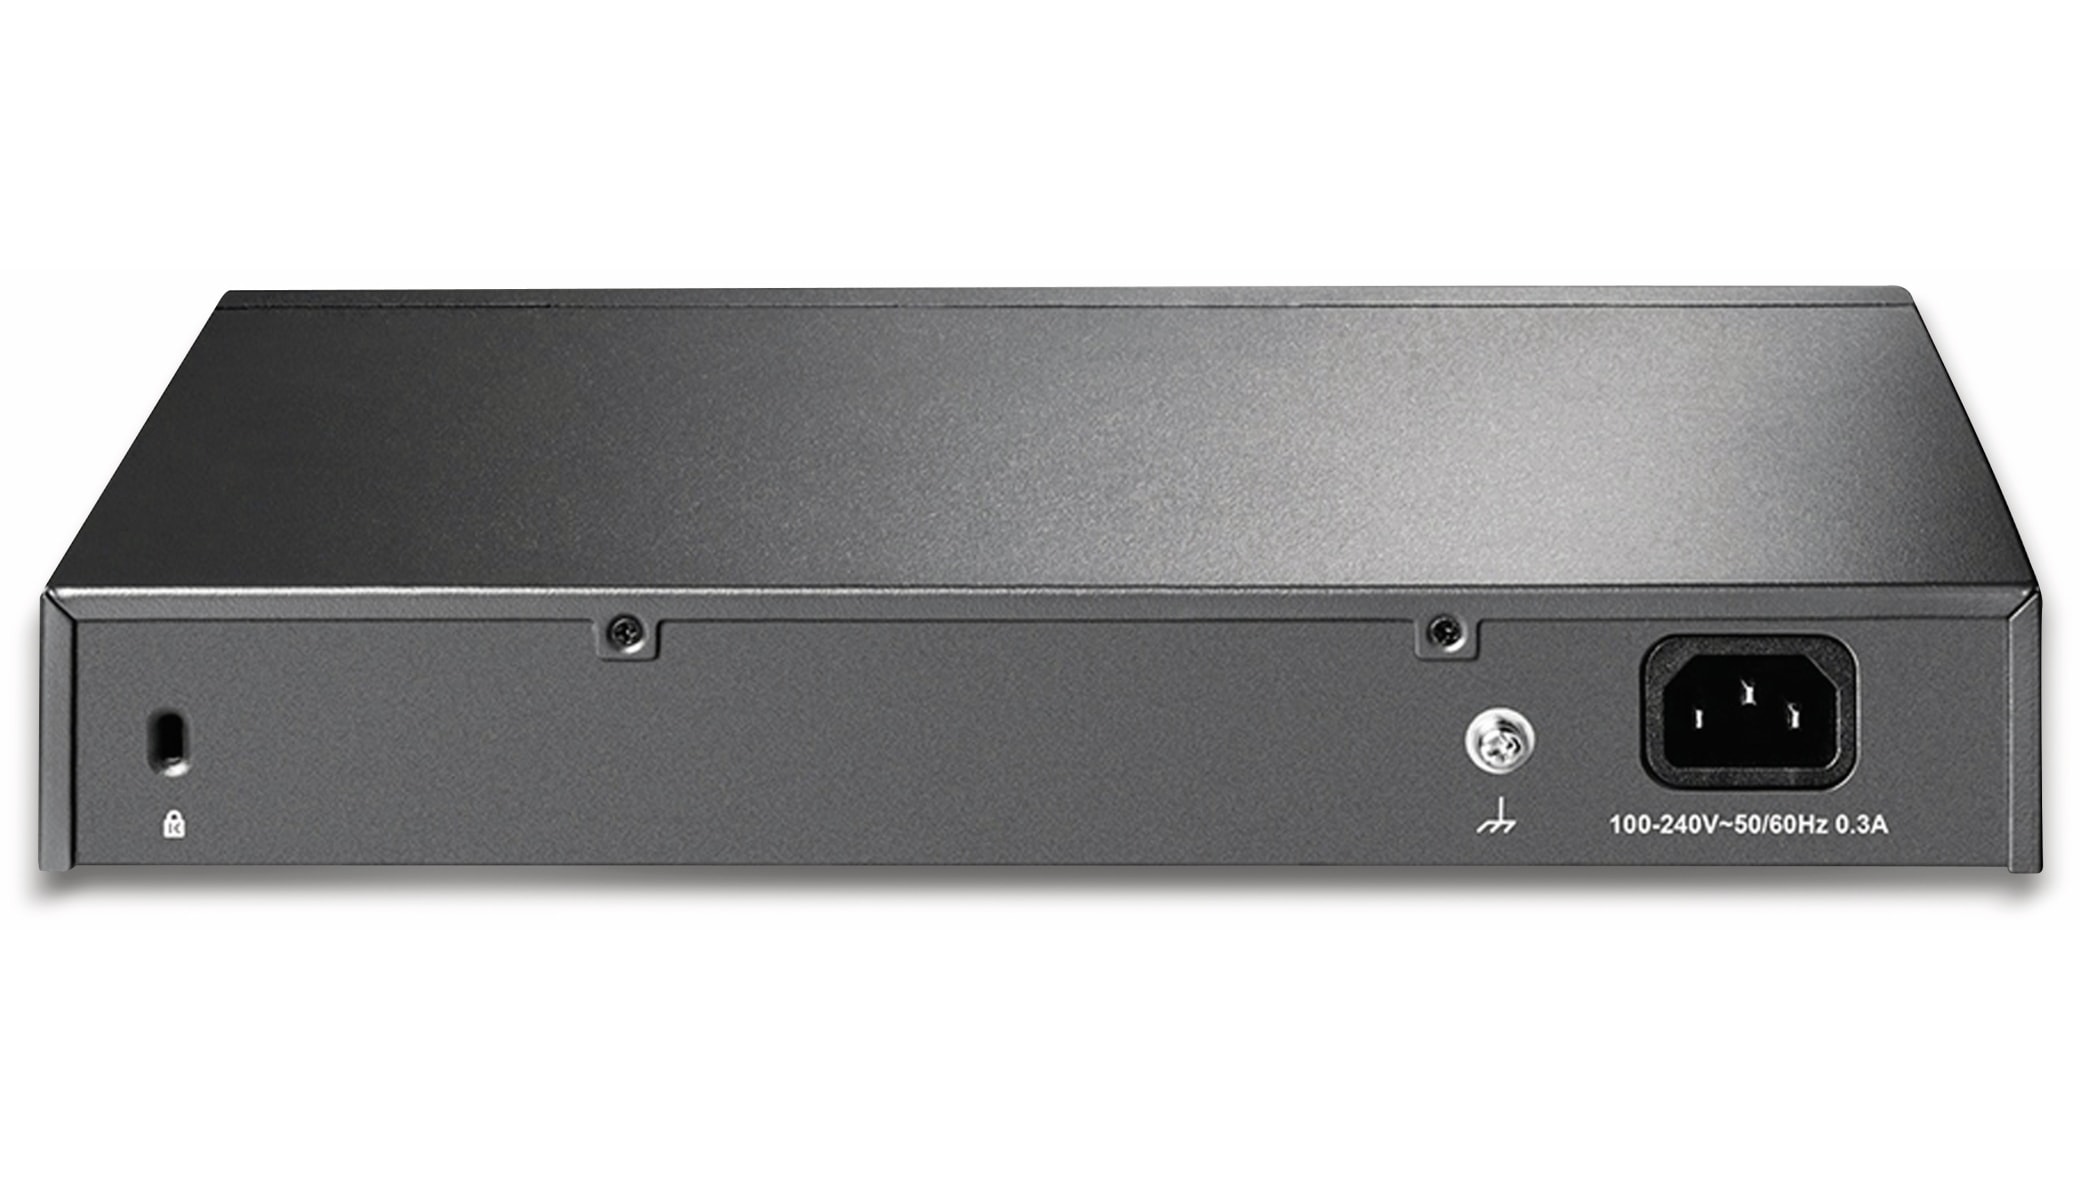 TP-LINK Switch Rackmount TL-SF1024D